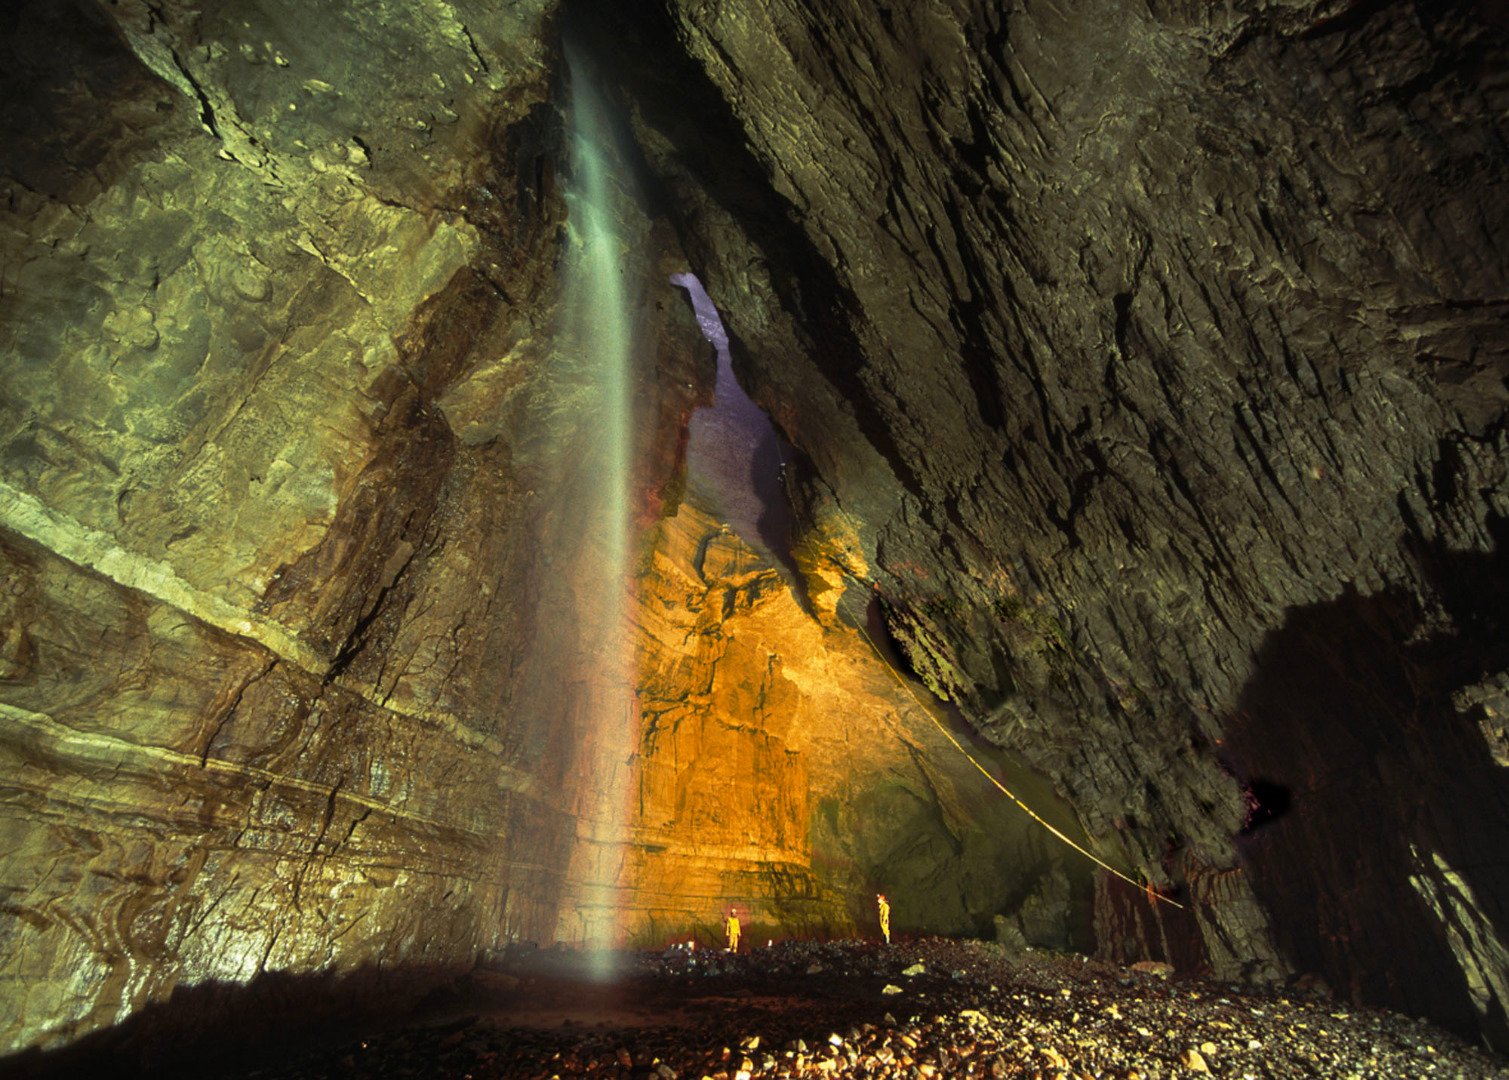 Gaping Gill - the inside of a large cavern, with a waterfall entering from above, directly